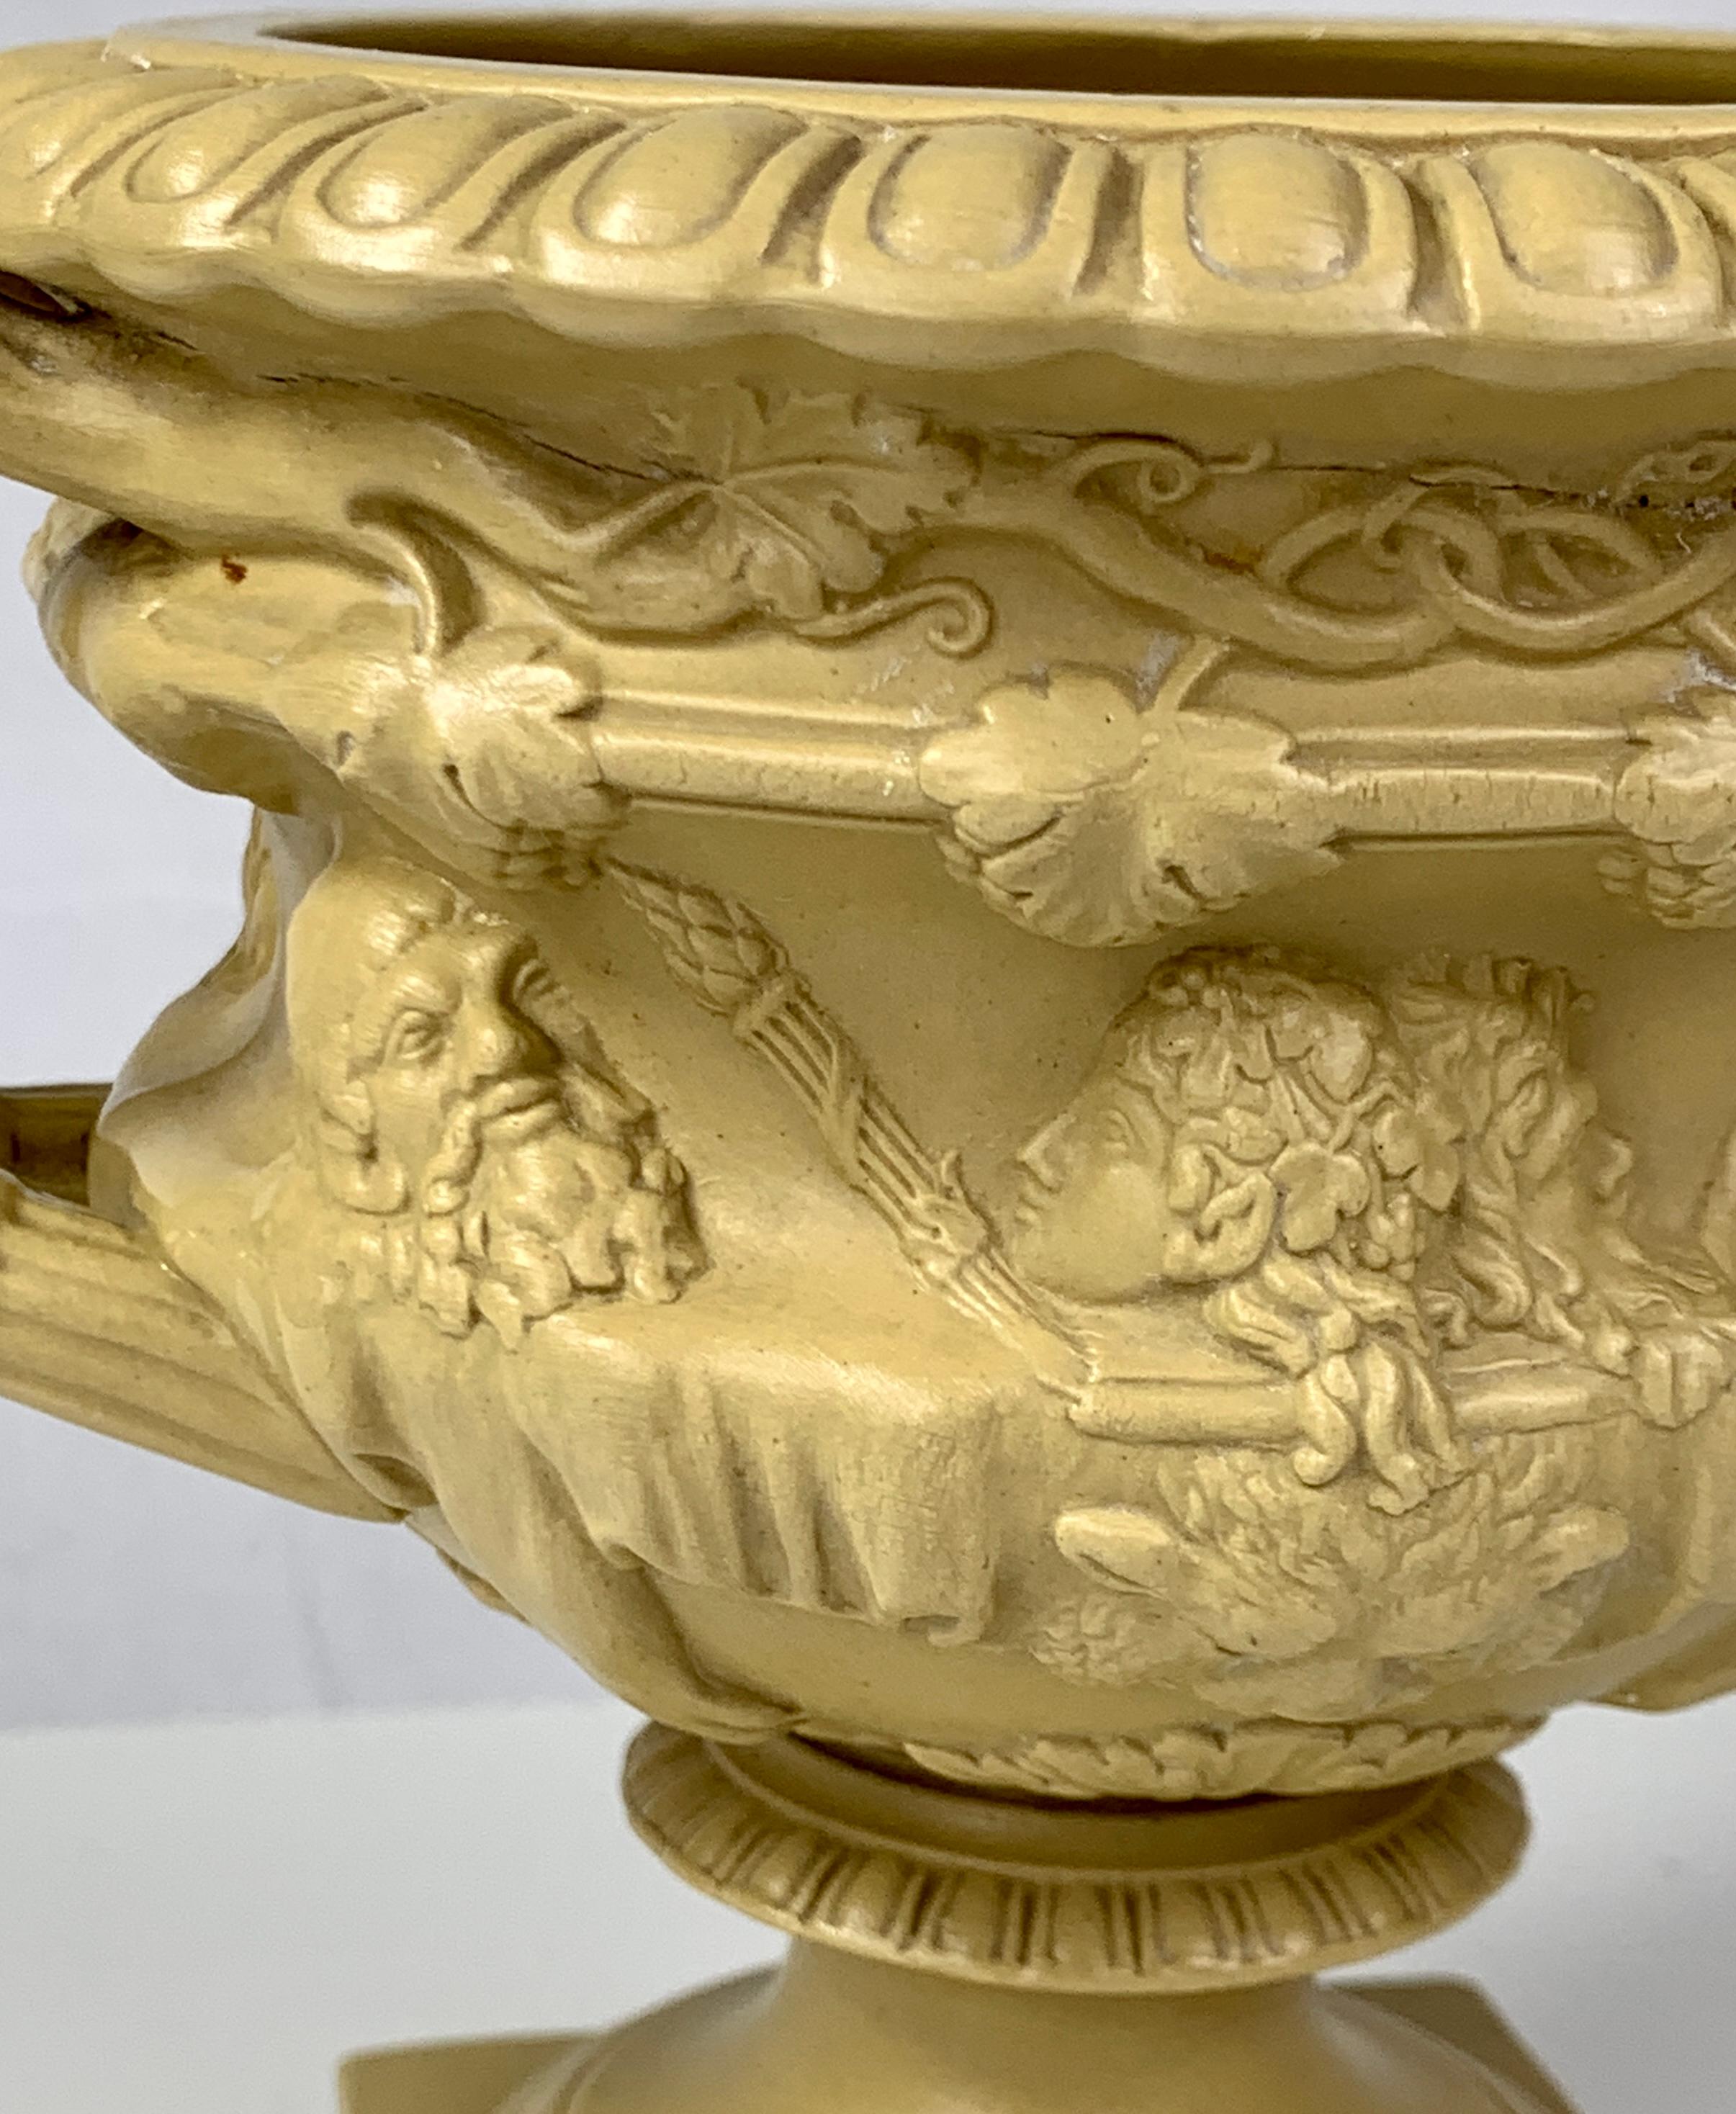 Ridgway made this drabware vase in England circa 1830. 
Pressed out in a mold, this eye-catching vase has high-relief neoclassical decoration consisting of Roman-style portraits under a band of grape leaves on the vine. 
The handles are in the form